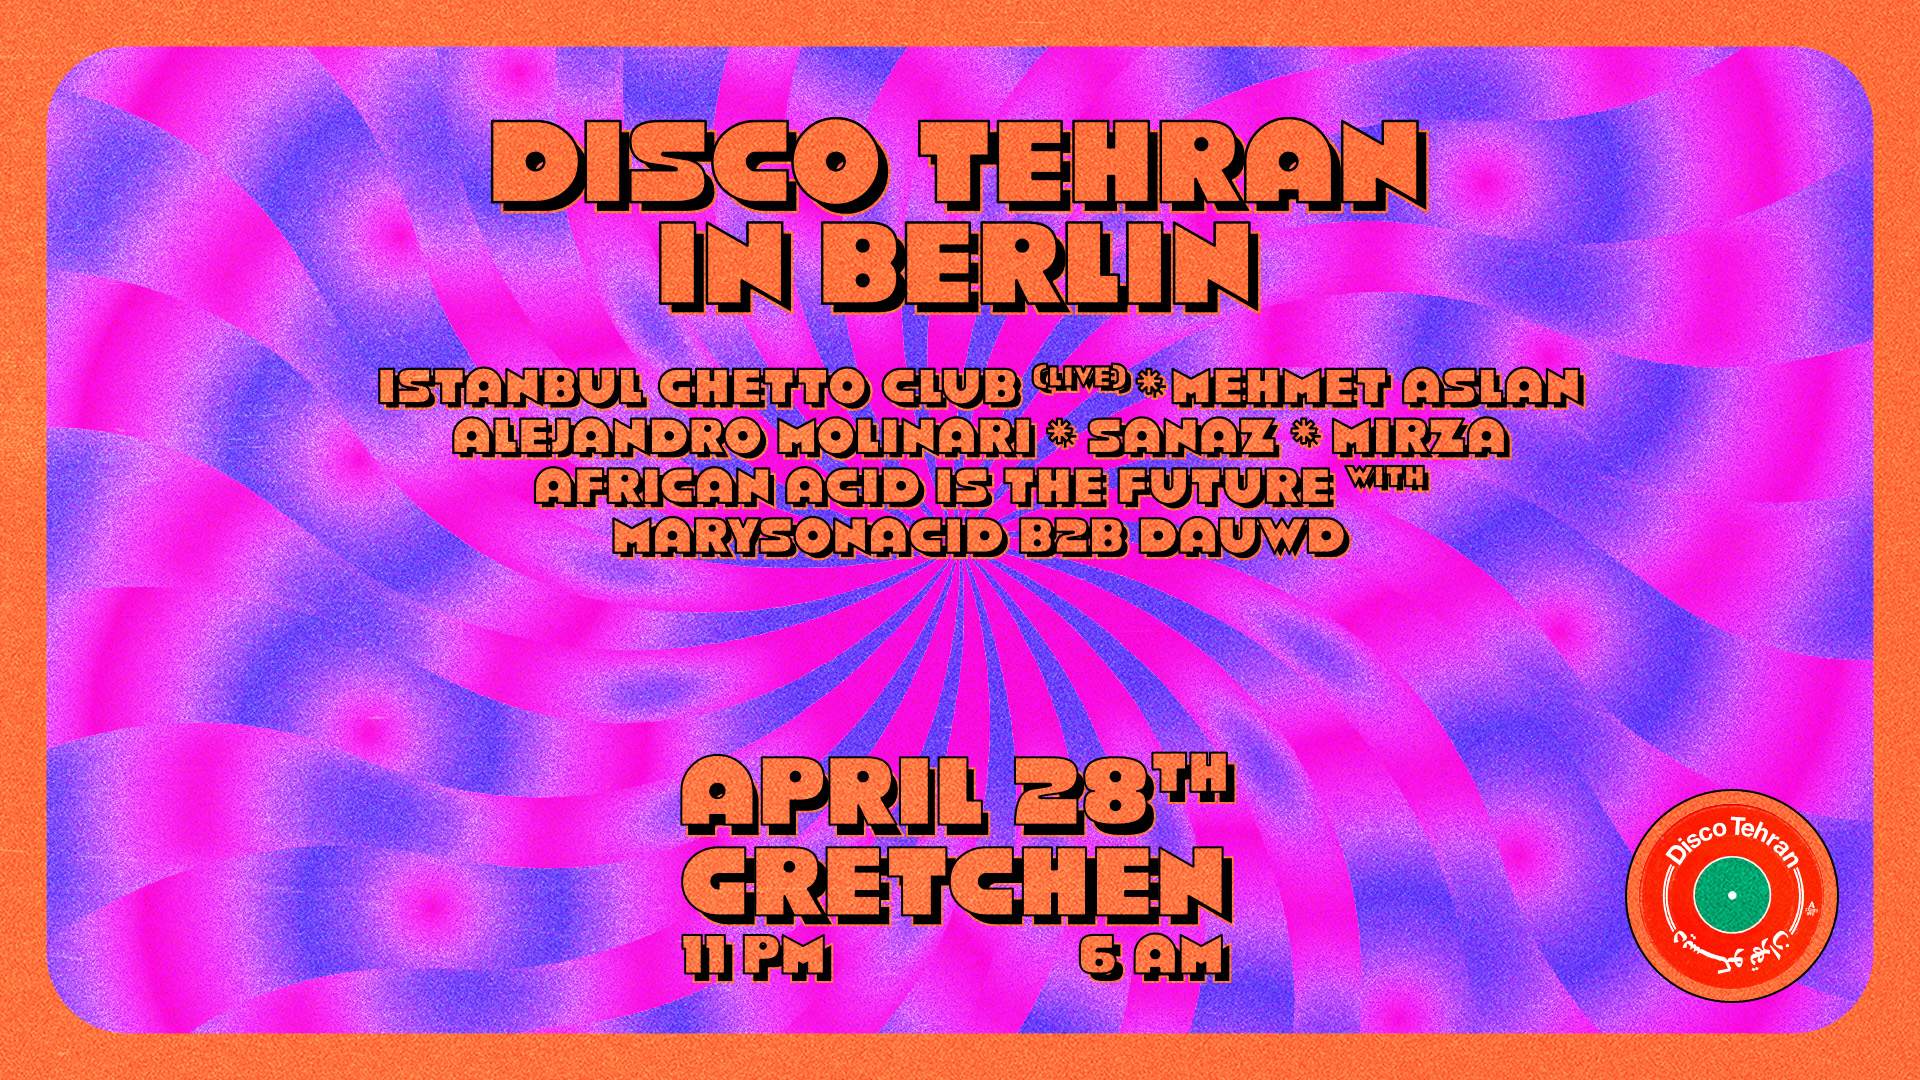 Disco Tehran w/ Istanbul Ghetto Club, African Acid is the Future, Mehmet Aslan and More - フライヤー表